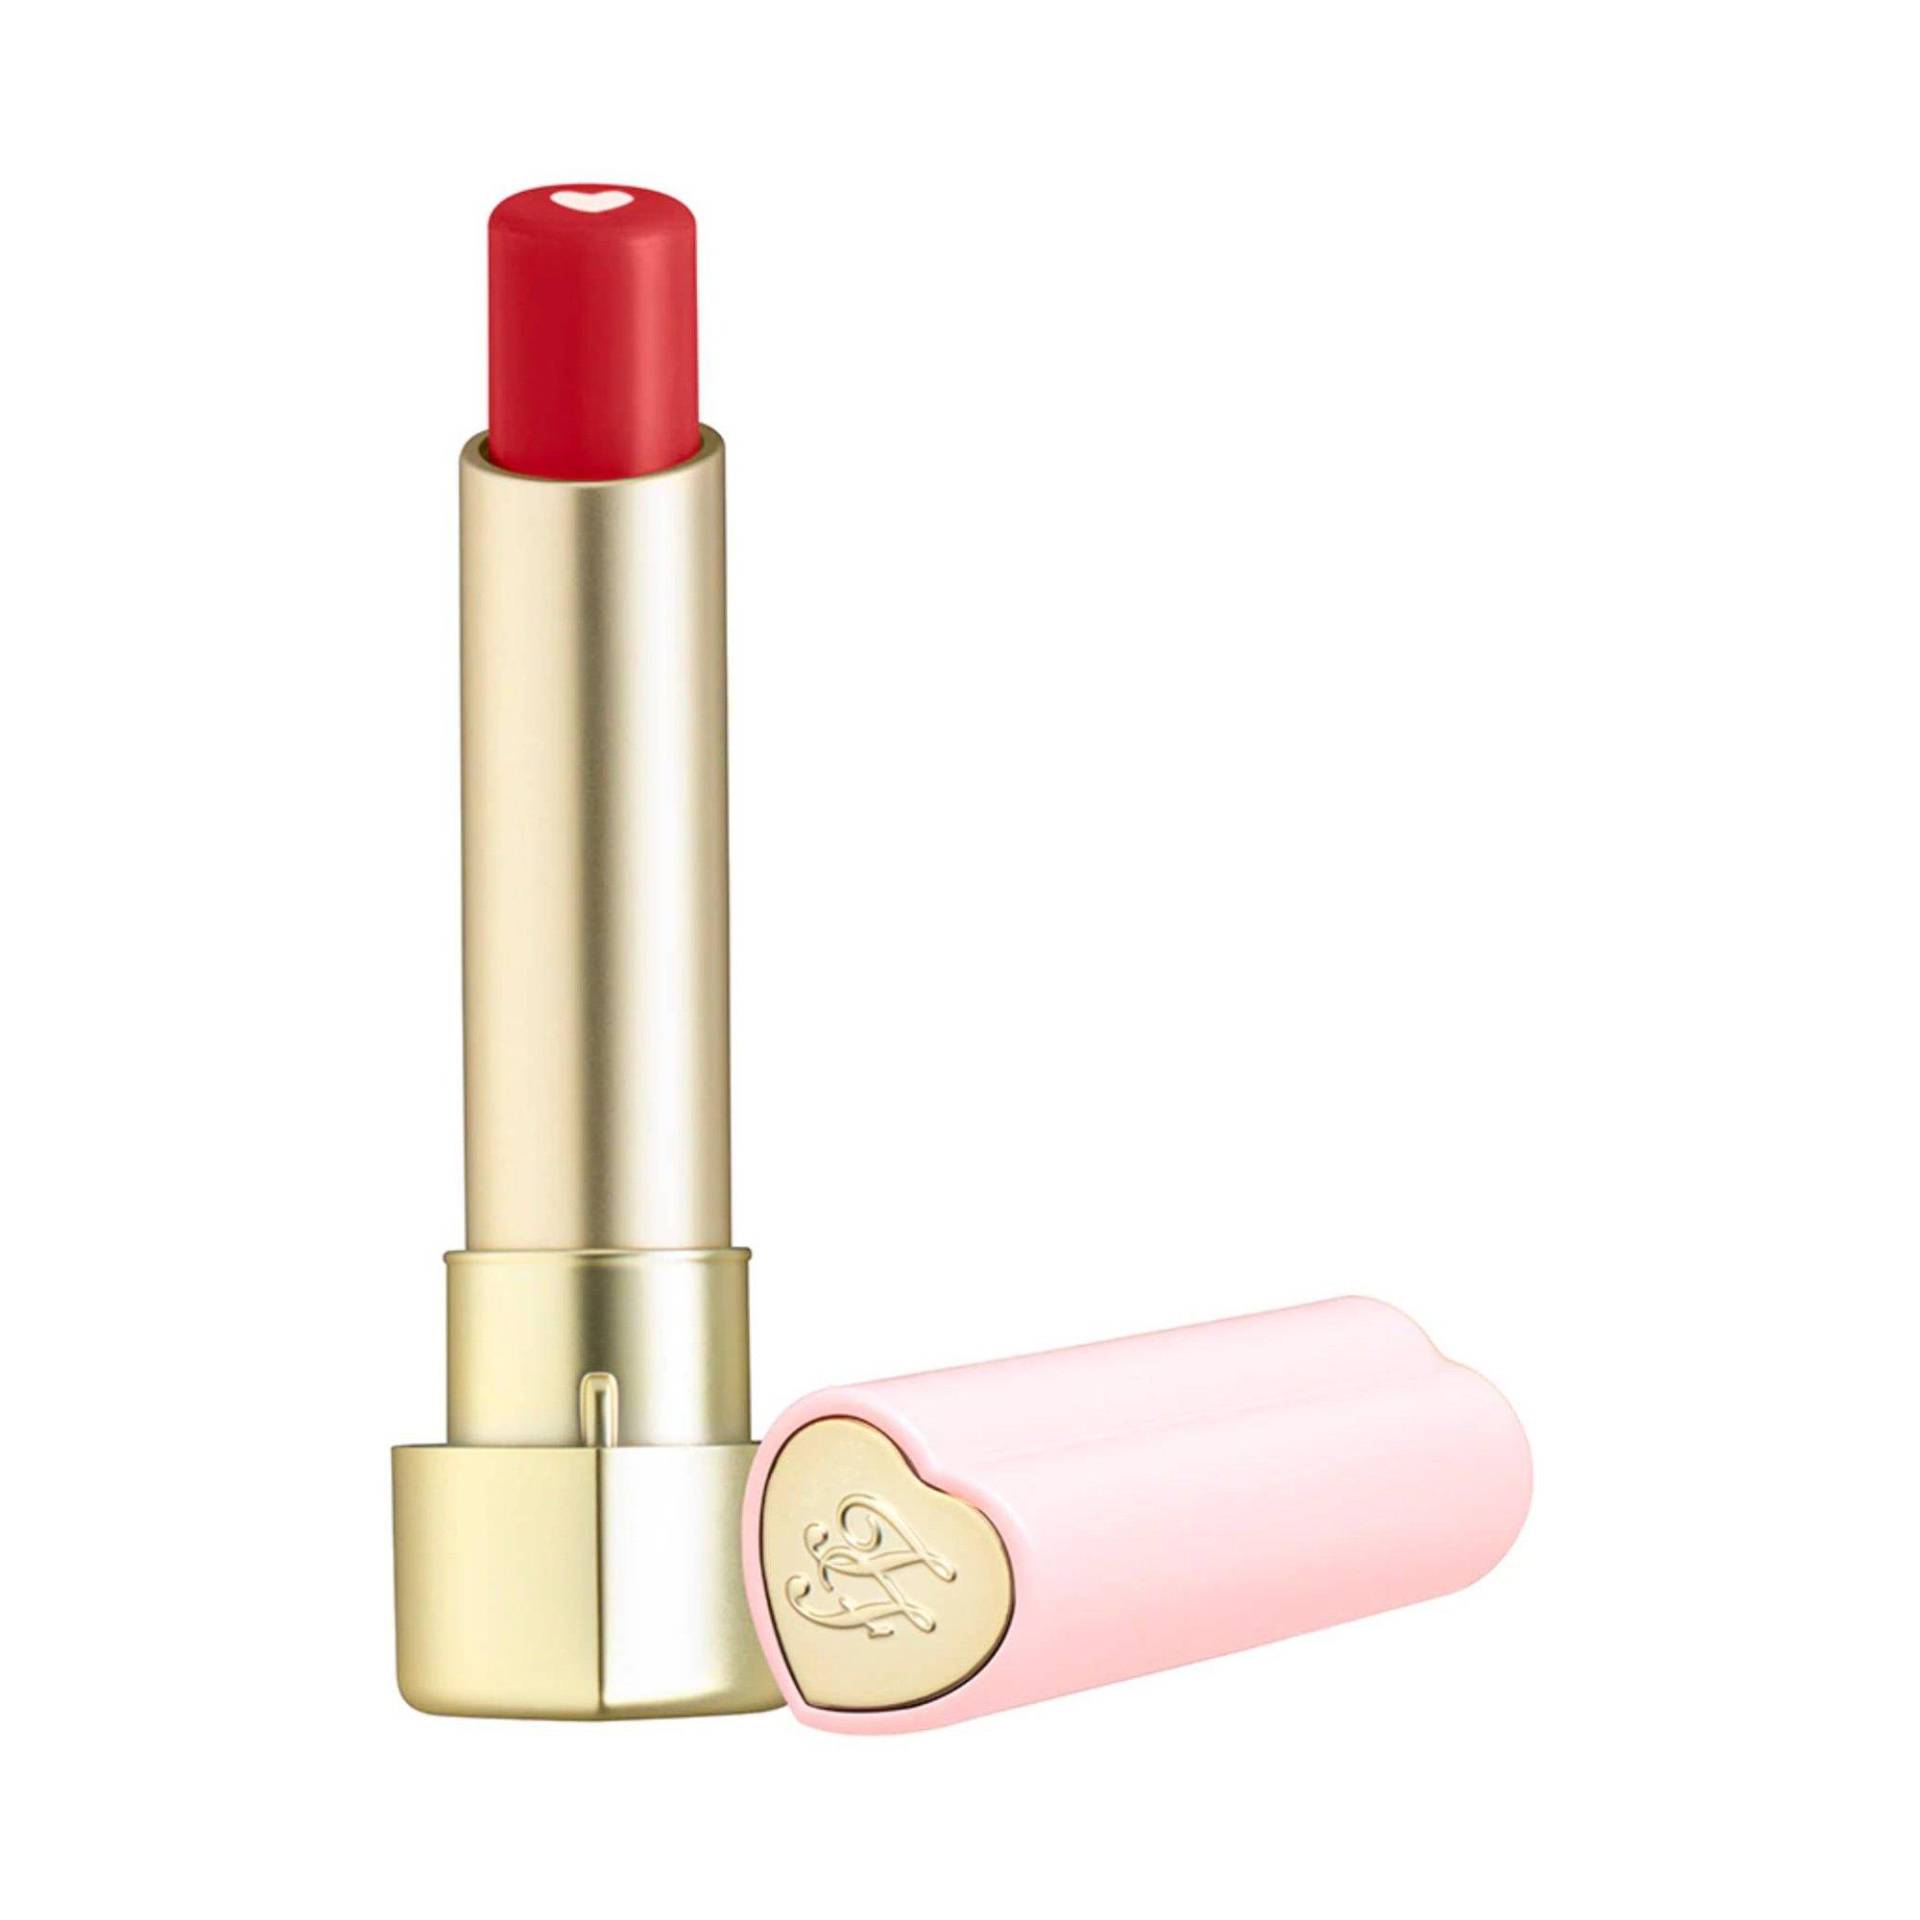 Too Femme Heart Core Lipstick Damen Nothing Compares To U von Too Faced